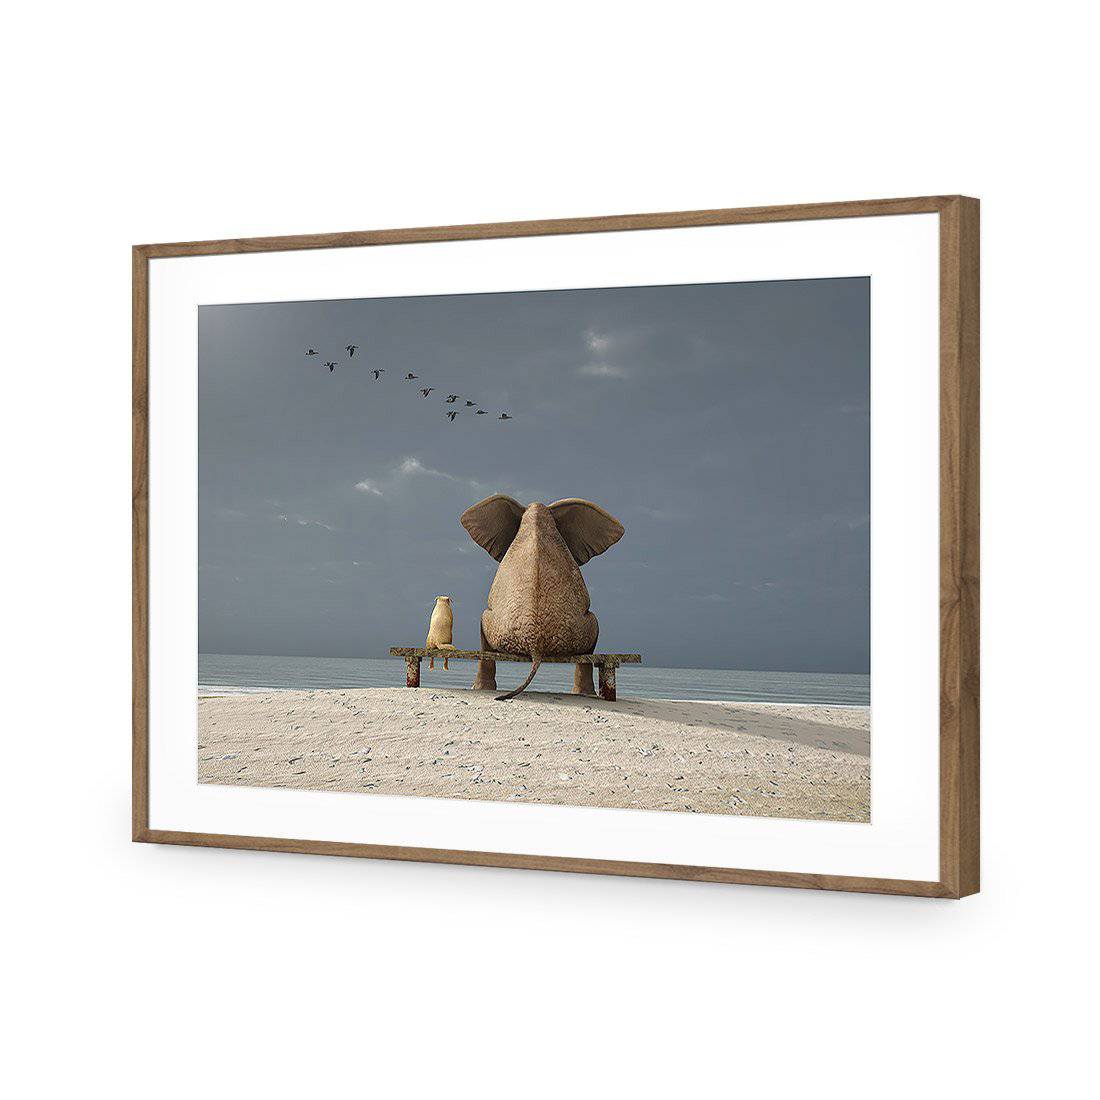 Little And Large-Acrylic-Wall Art Design-With Border-Acrylic - Natural Frame-45x30cm-Wall Art Designs